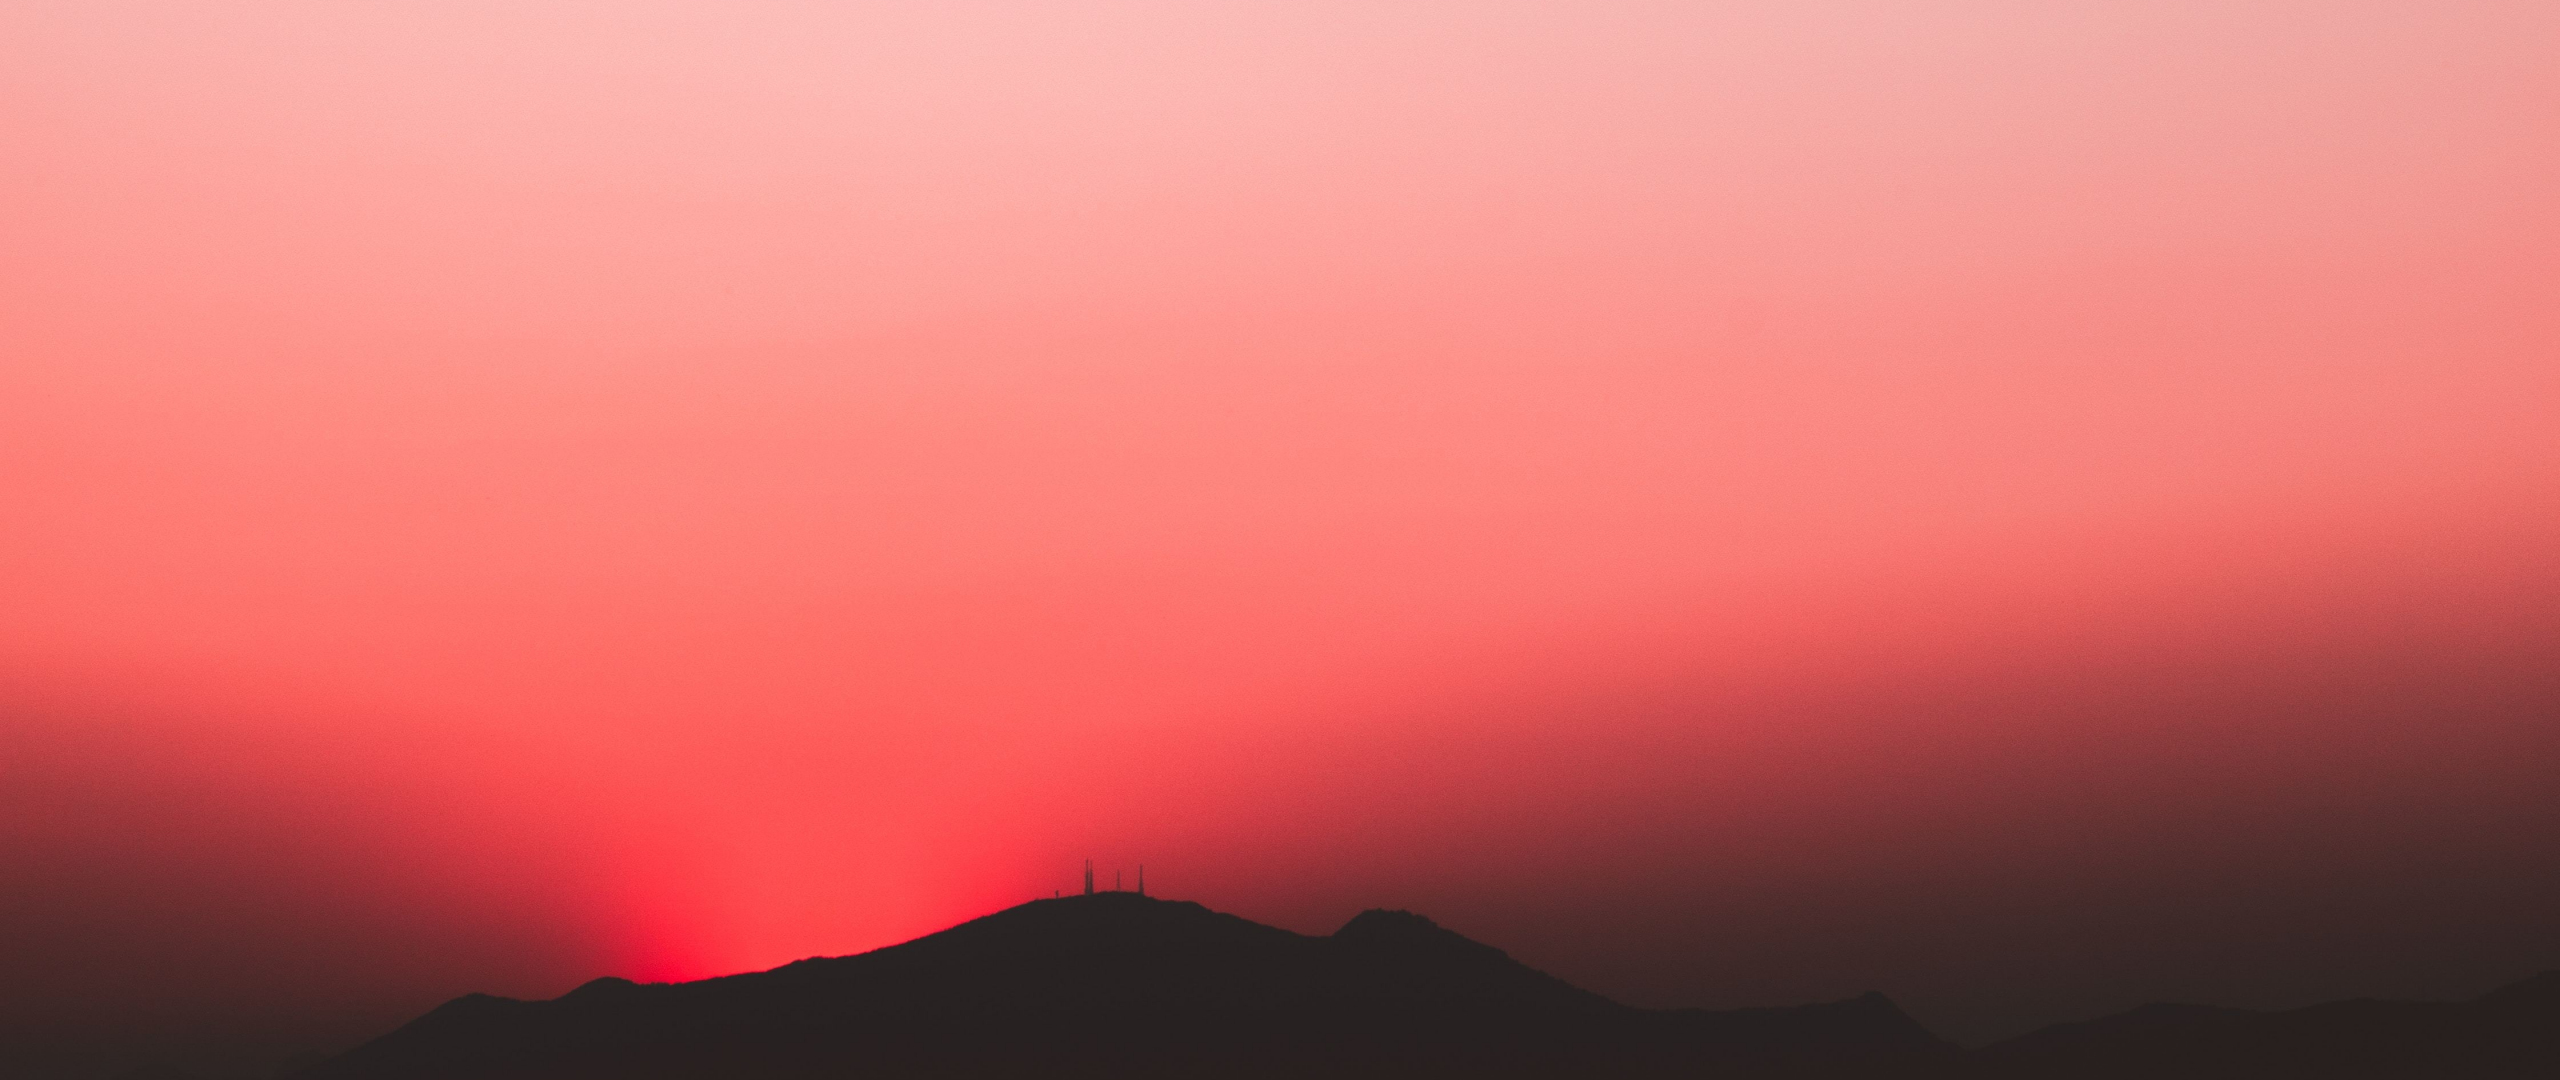 Download wallpaper 2560x1080 sunset, red sky, sunset, nature, hill ...